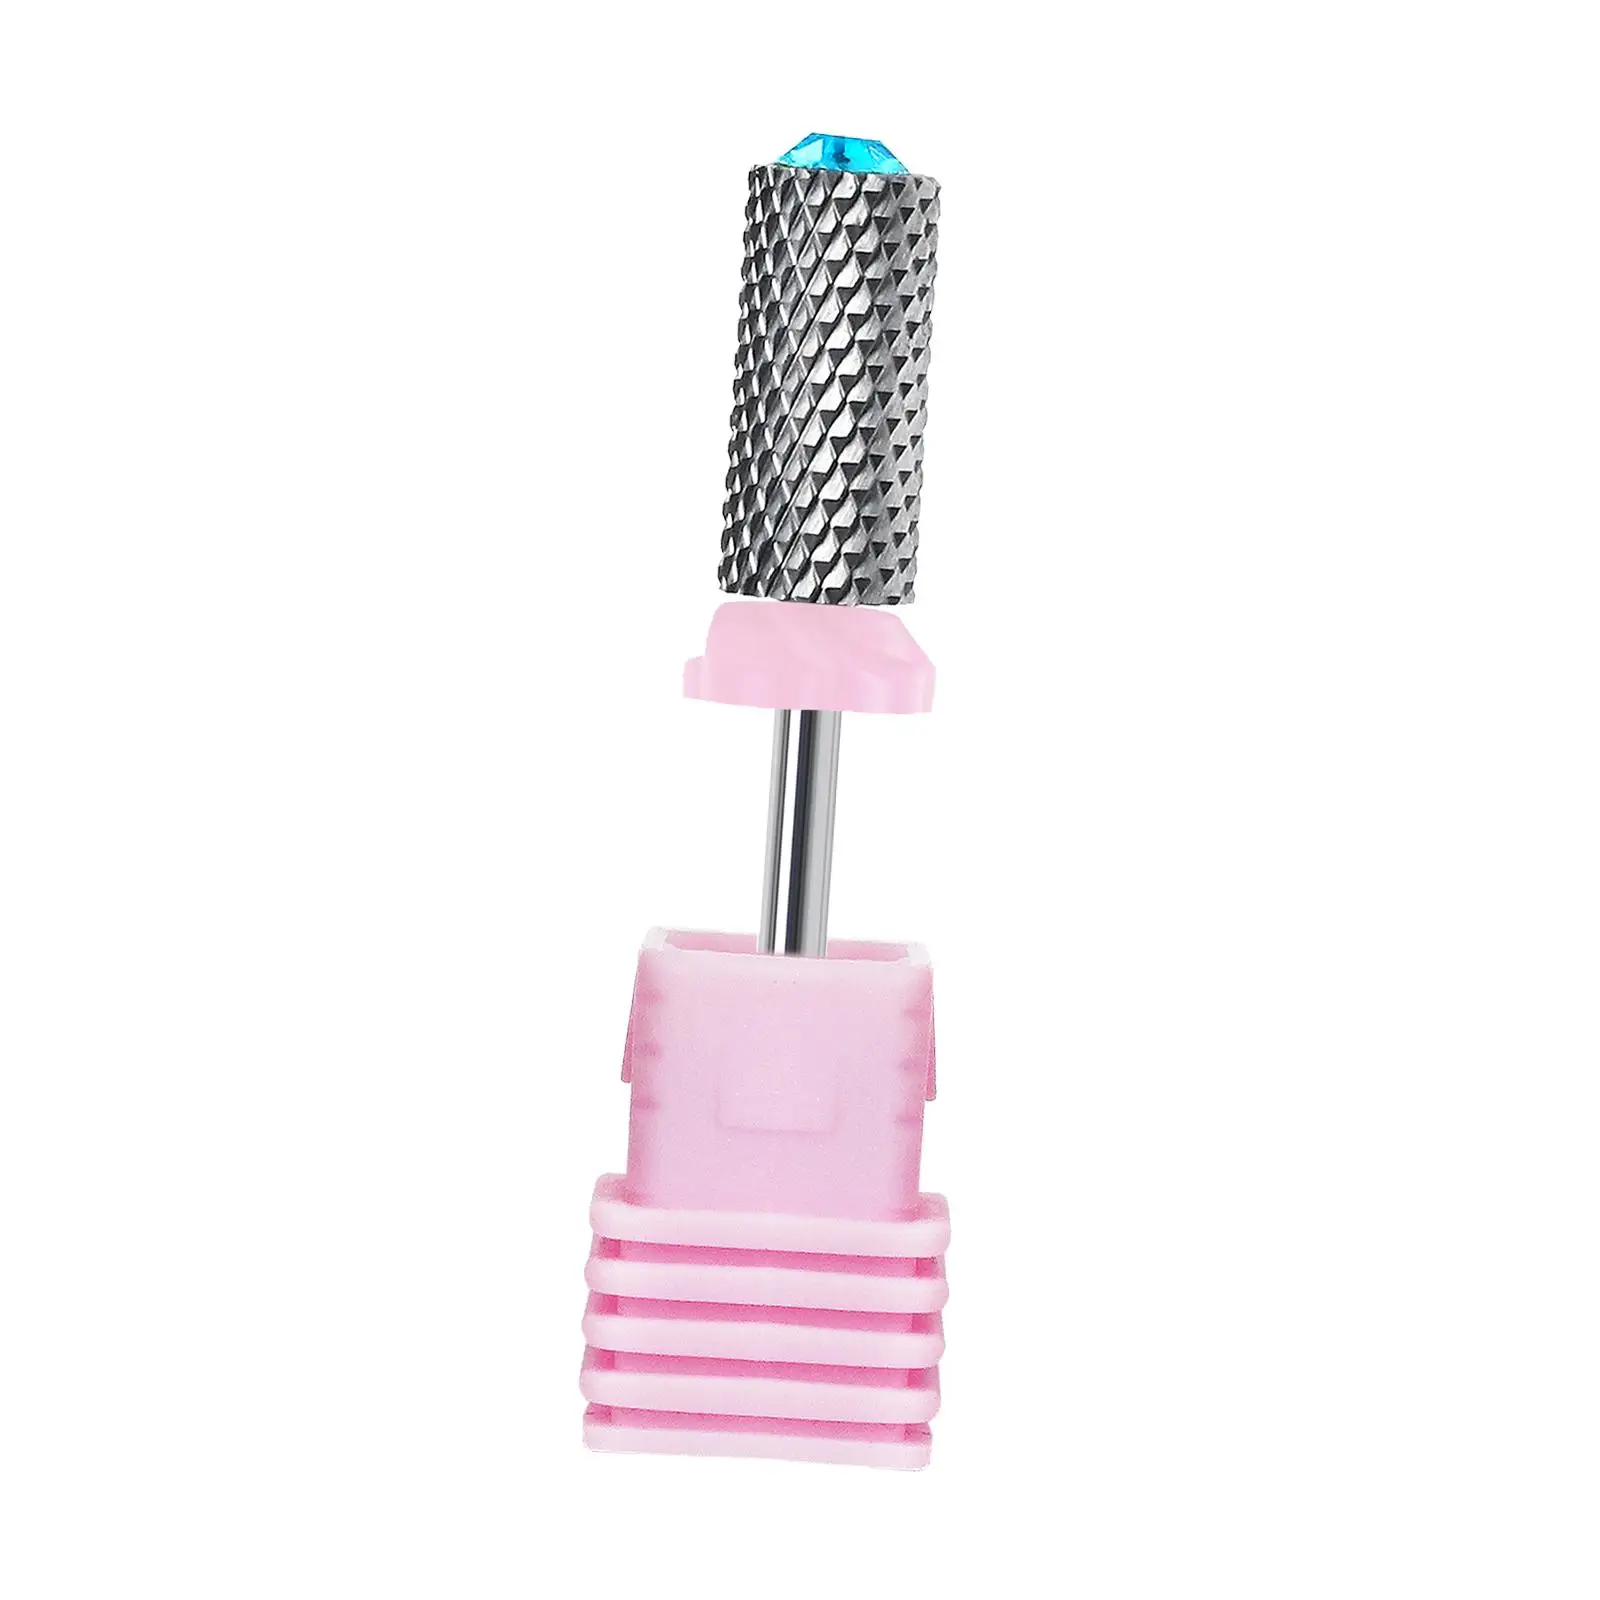 Nail Drill Bit Professional Tungsten Steel Replace Parts Nail Art Tool for Cuticle Polishing Acrylic Gel Nails Salon Home Use